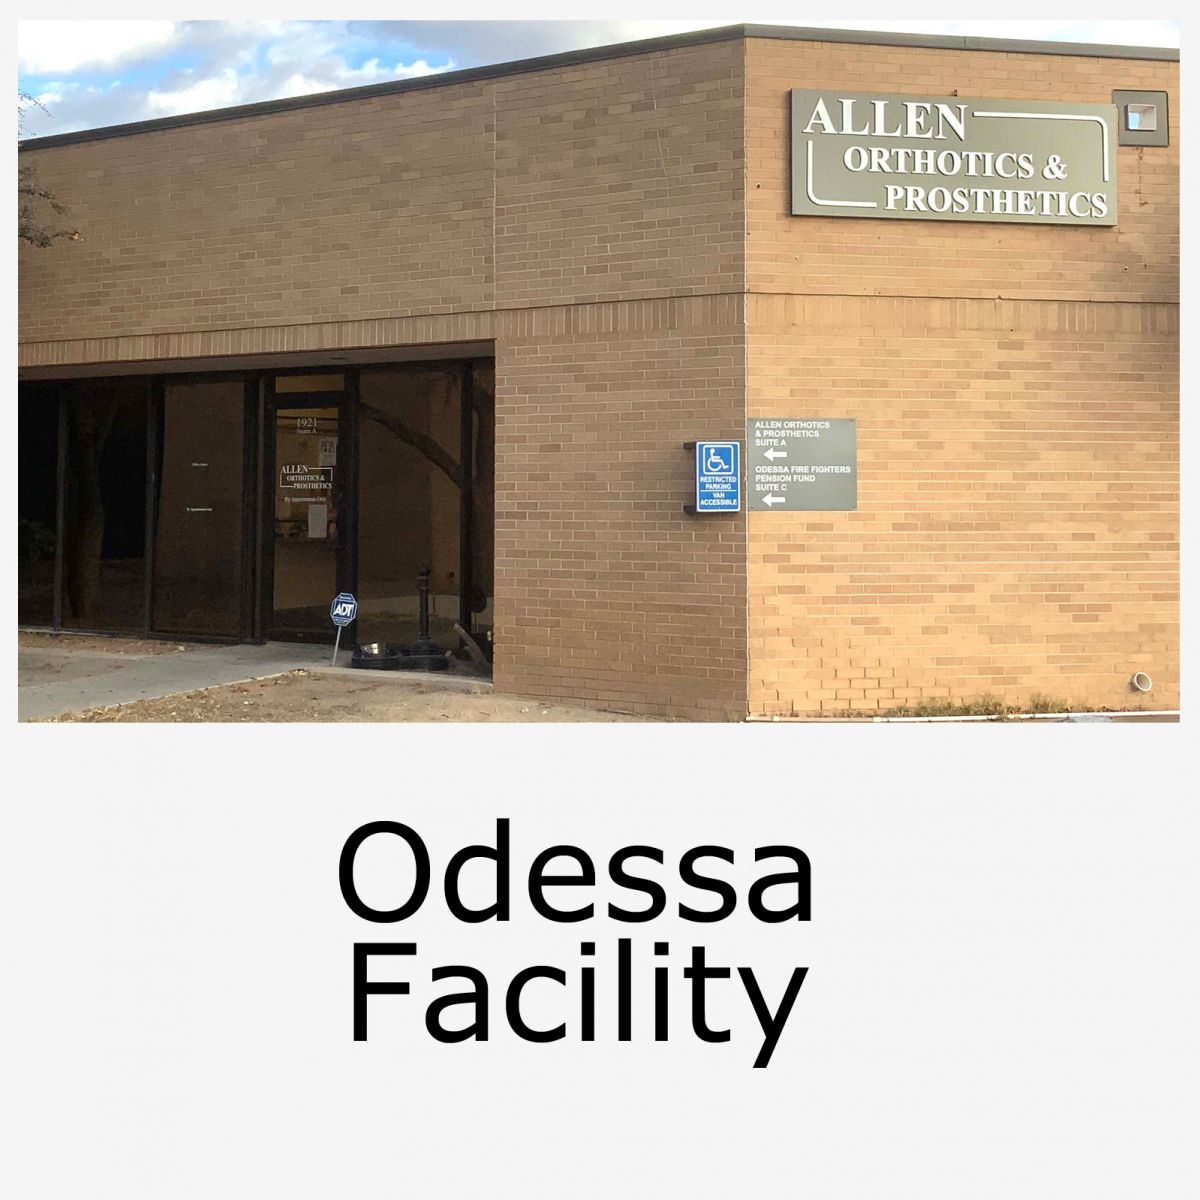 images/Employees & Facility/odessa 2.jpg